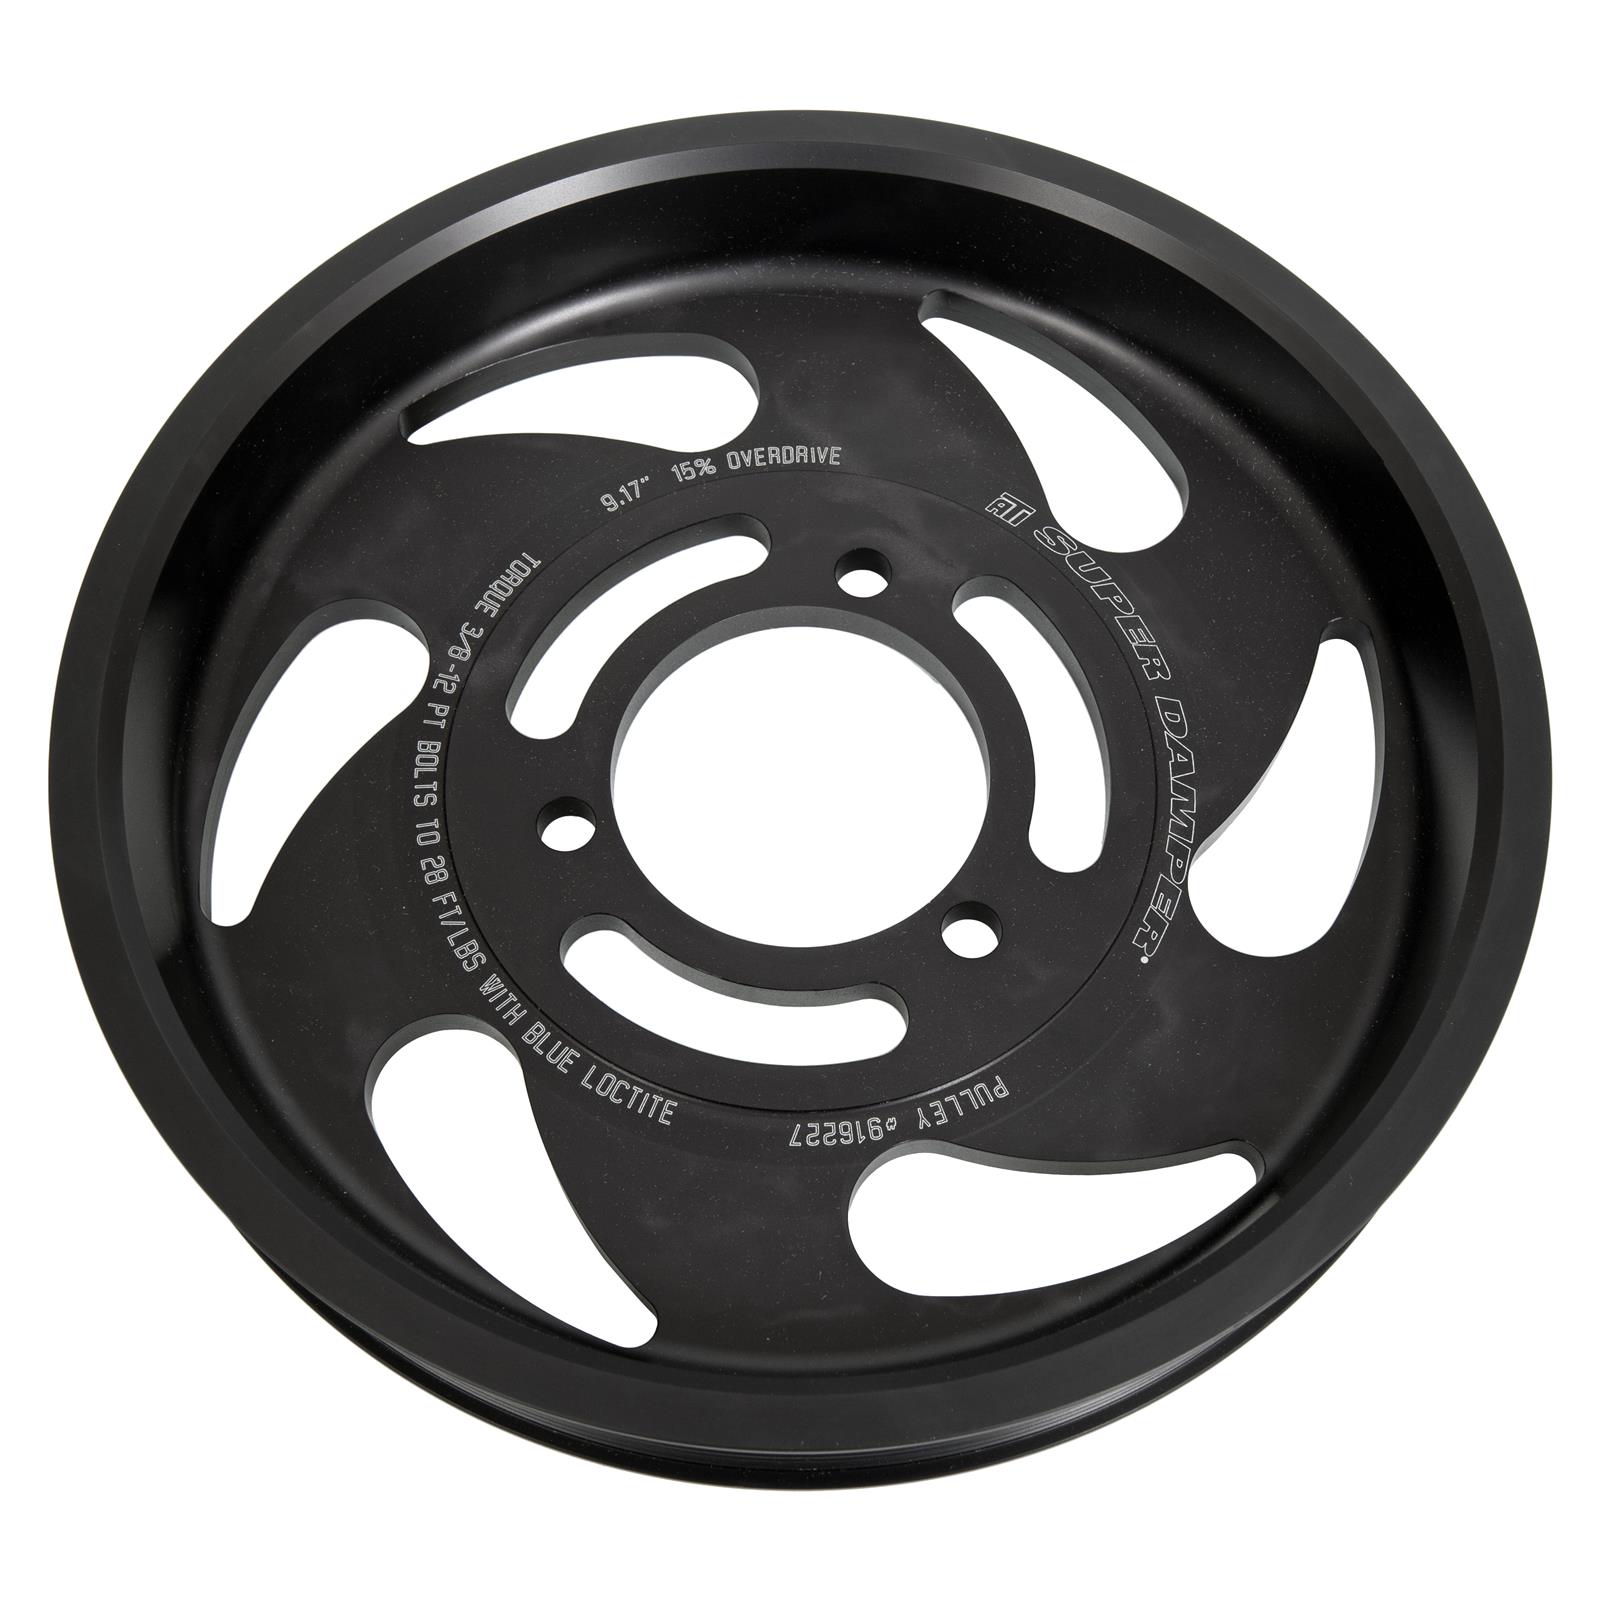 ATI 15% Overdrive Lower Supercharger Drive Pulley for wet sump LT4 Camaro & CTS-